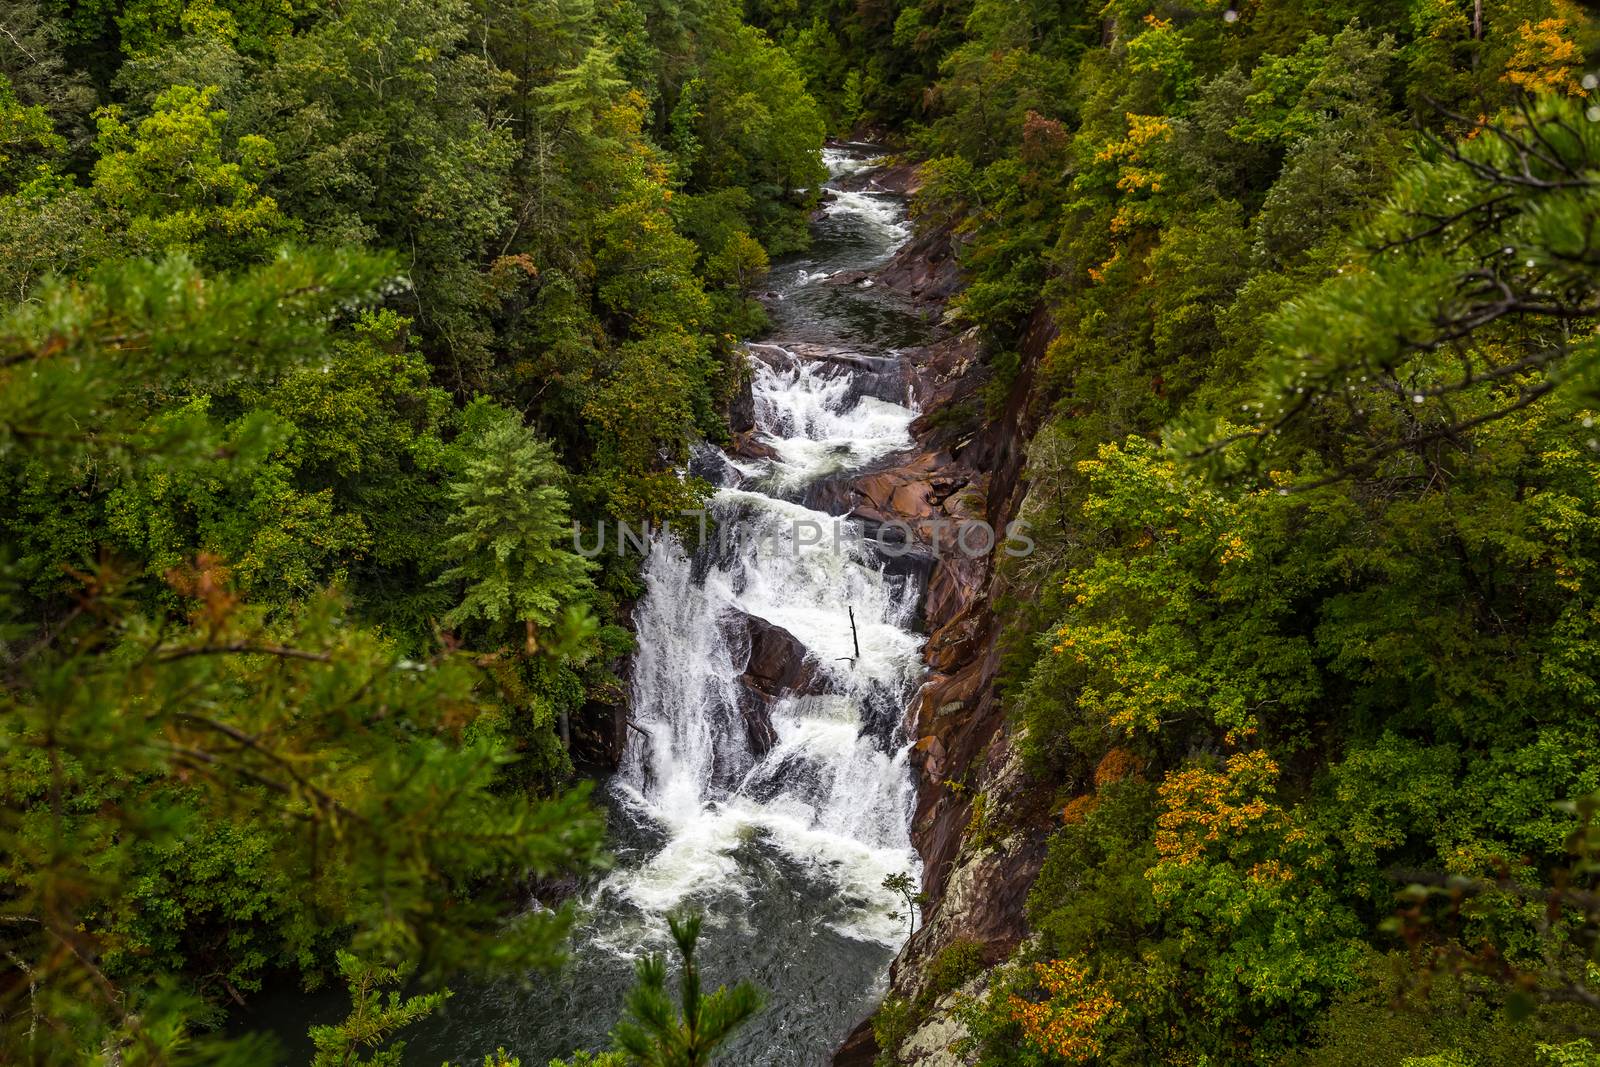 One of the most spectacular canyons in the eastern U.S., Tallulah Gorge is two miles long and nearly 1,000 feet deep.